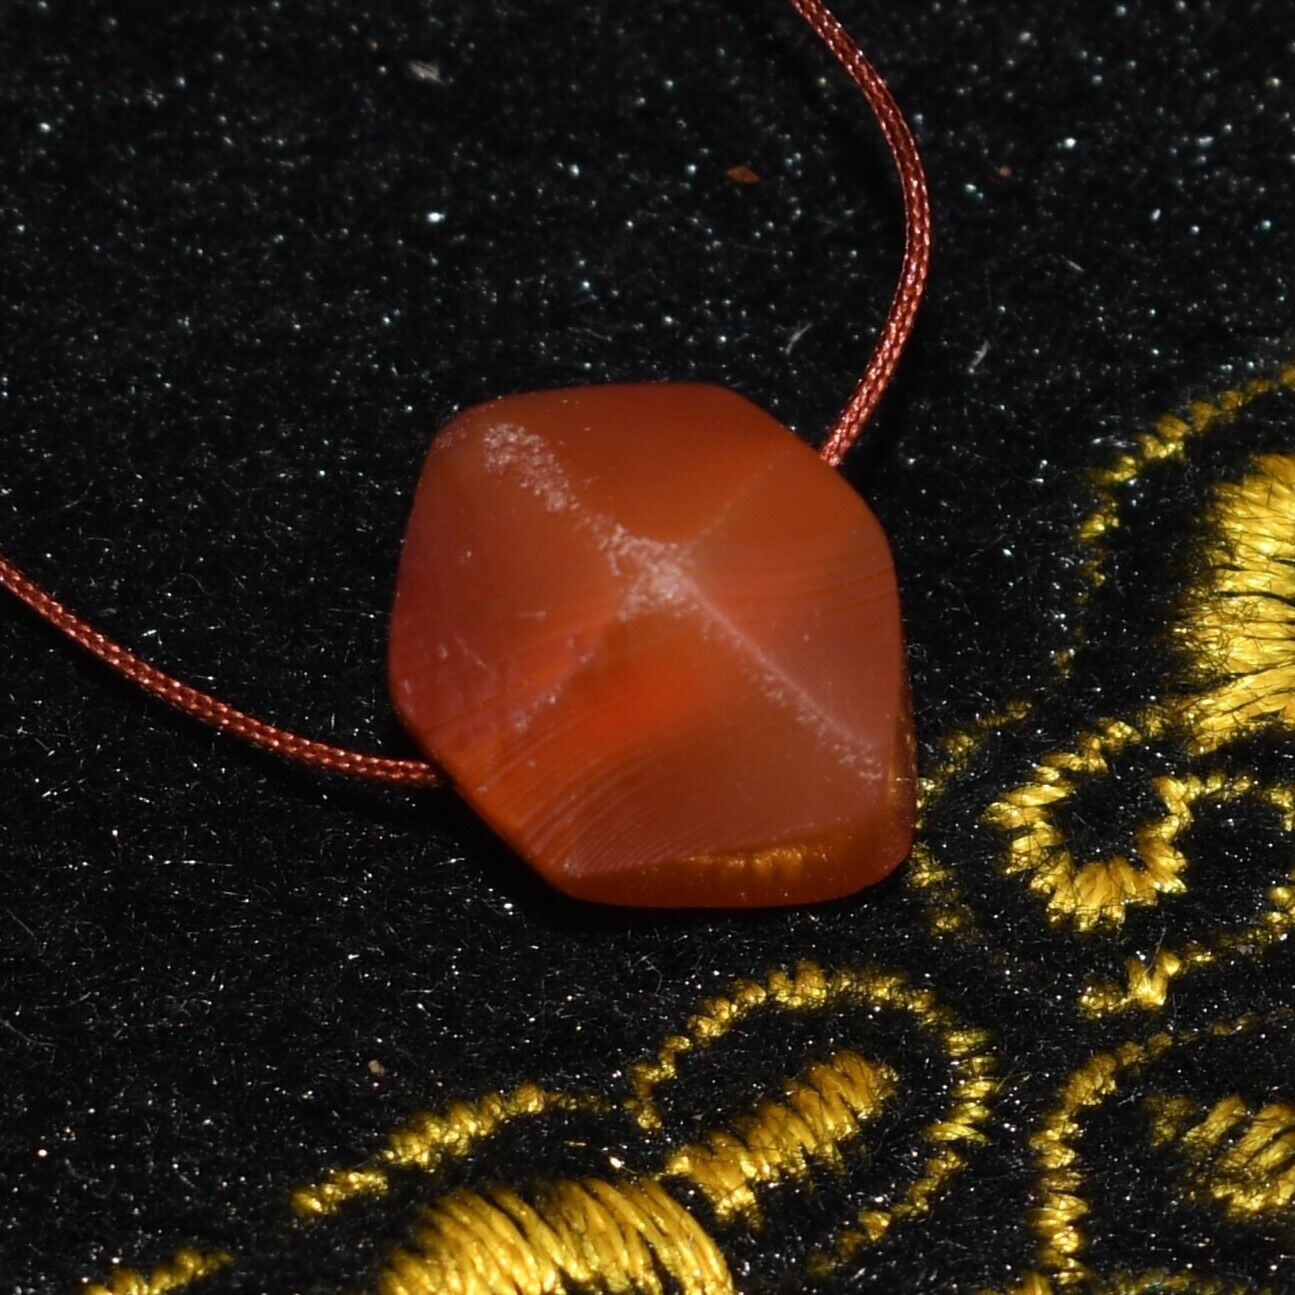 Authentic Ancient Near Eastern Carnelian Stone Bead over 1200 Years Old